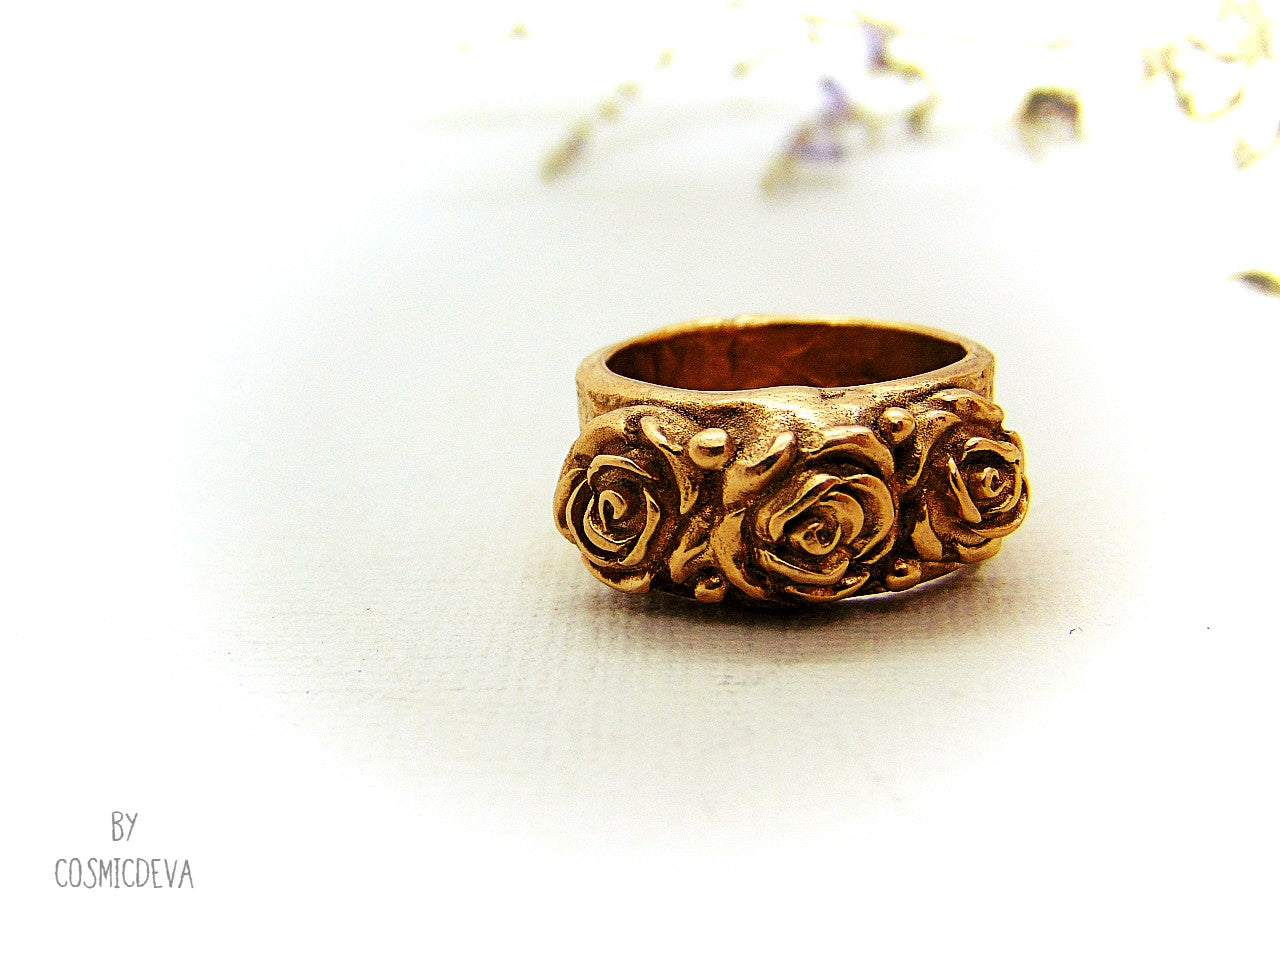 Handmade and hand formed unique organic solid gold bronze roman style ring featuring three roses with two hearts 💕 on the bottom side. This ring is sealed with Renaissance wax and comes with a complimentary polishing cloth. All my jewelry is packed in a beautiful gift box.